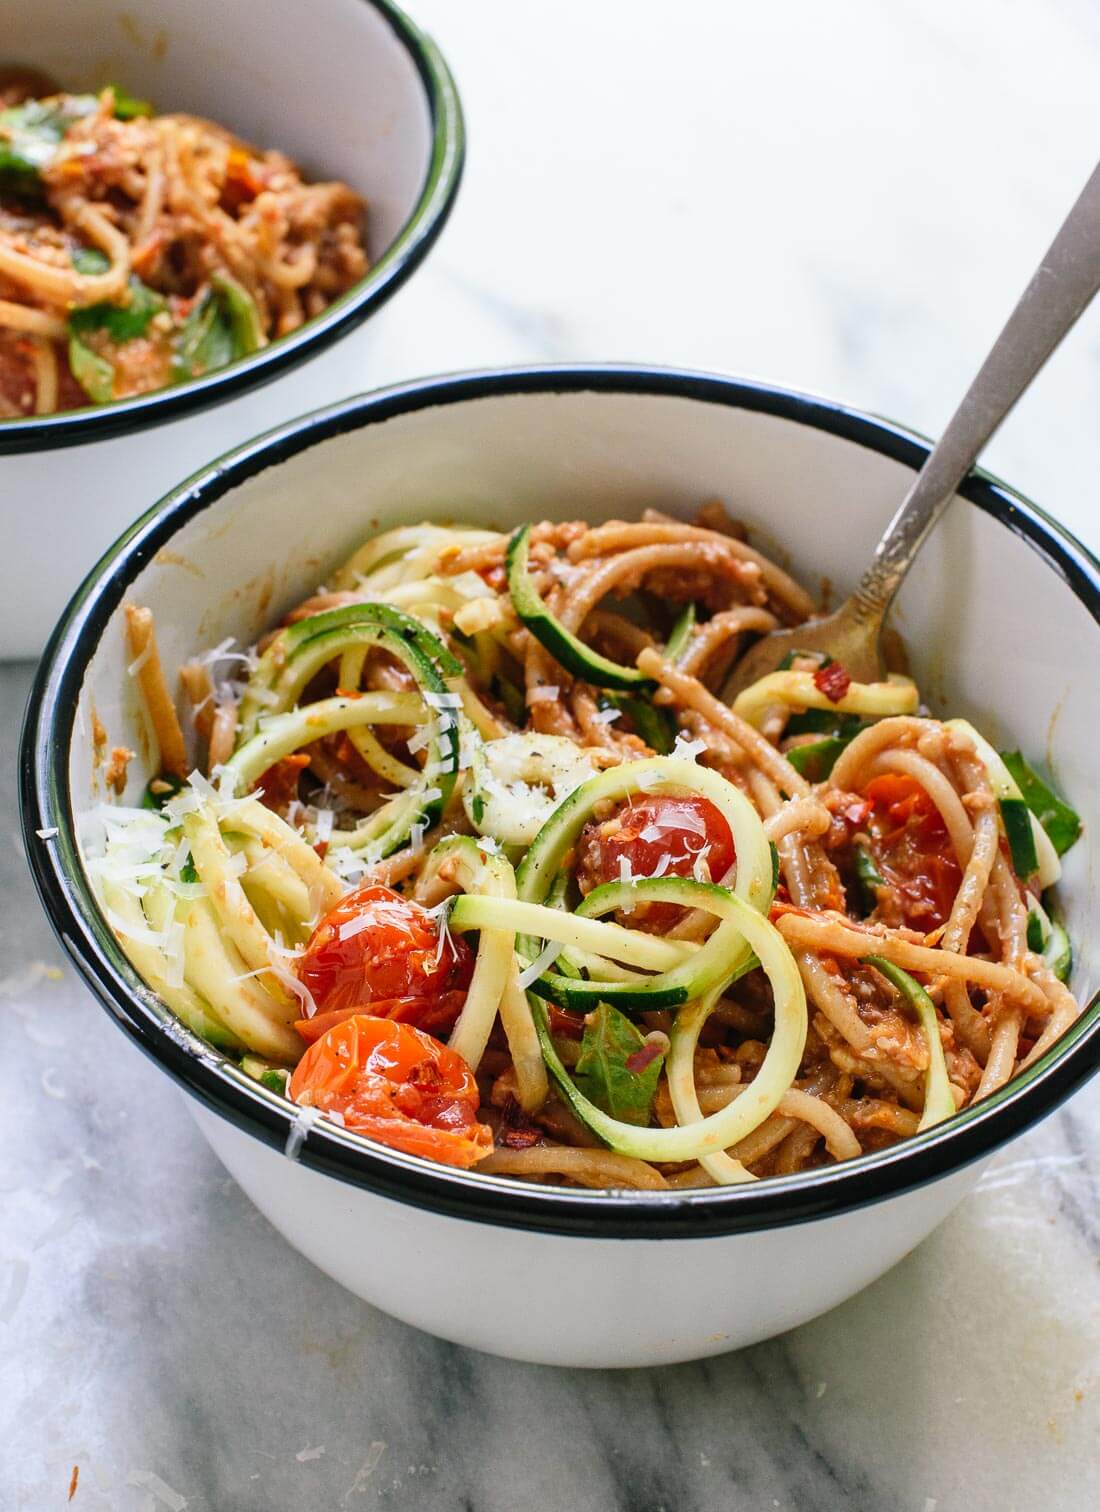 This fresh summer recipe features cherry tomato and sun-dried tomato pesto, zucchini noodles, and spaghetti! It's light and delicious. cookieandkate.com